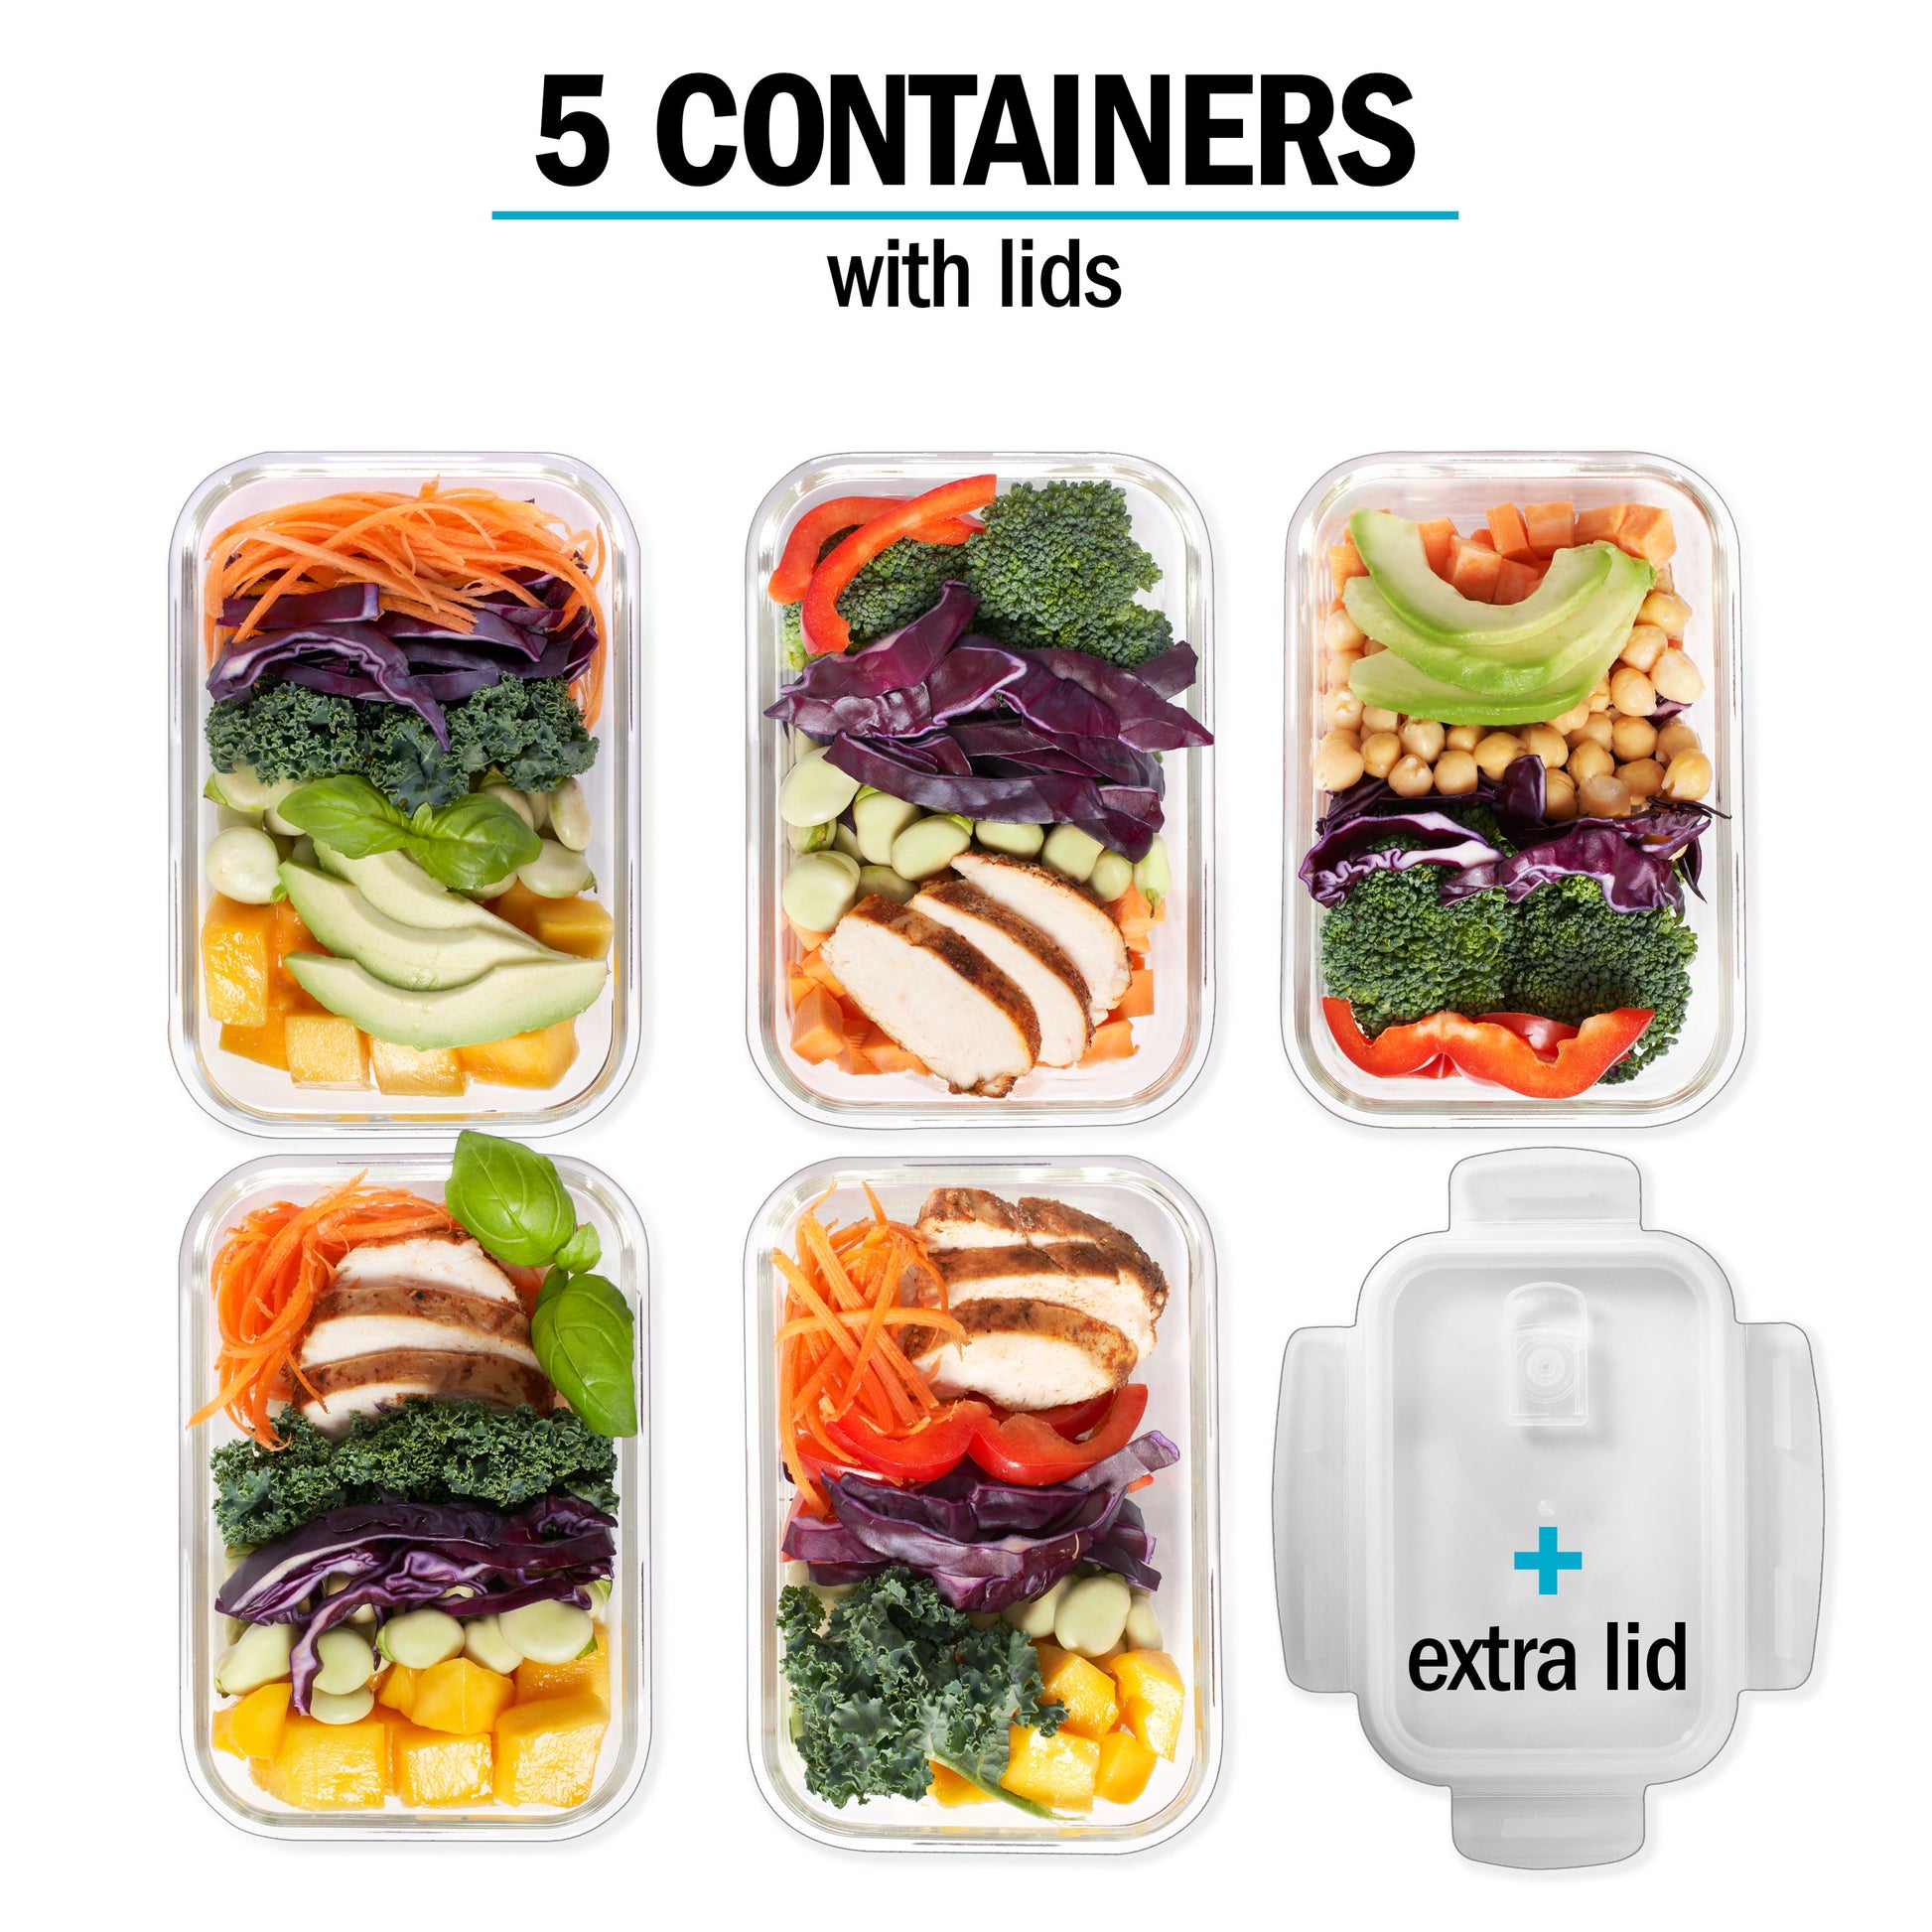 IGLUU Reusable Meal Prep Food Containers with Air Tight Lids 